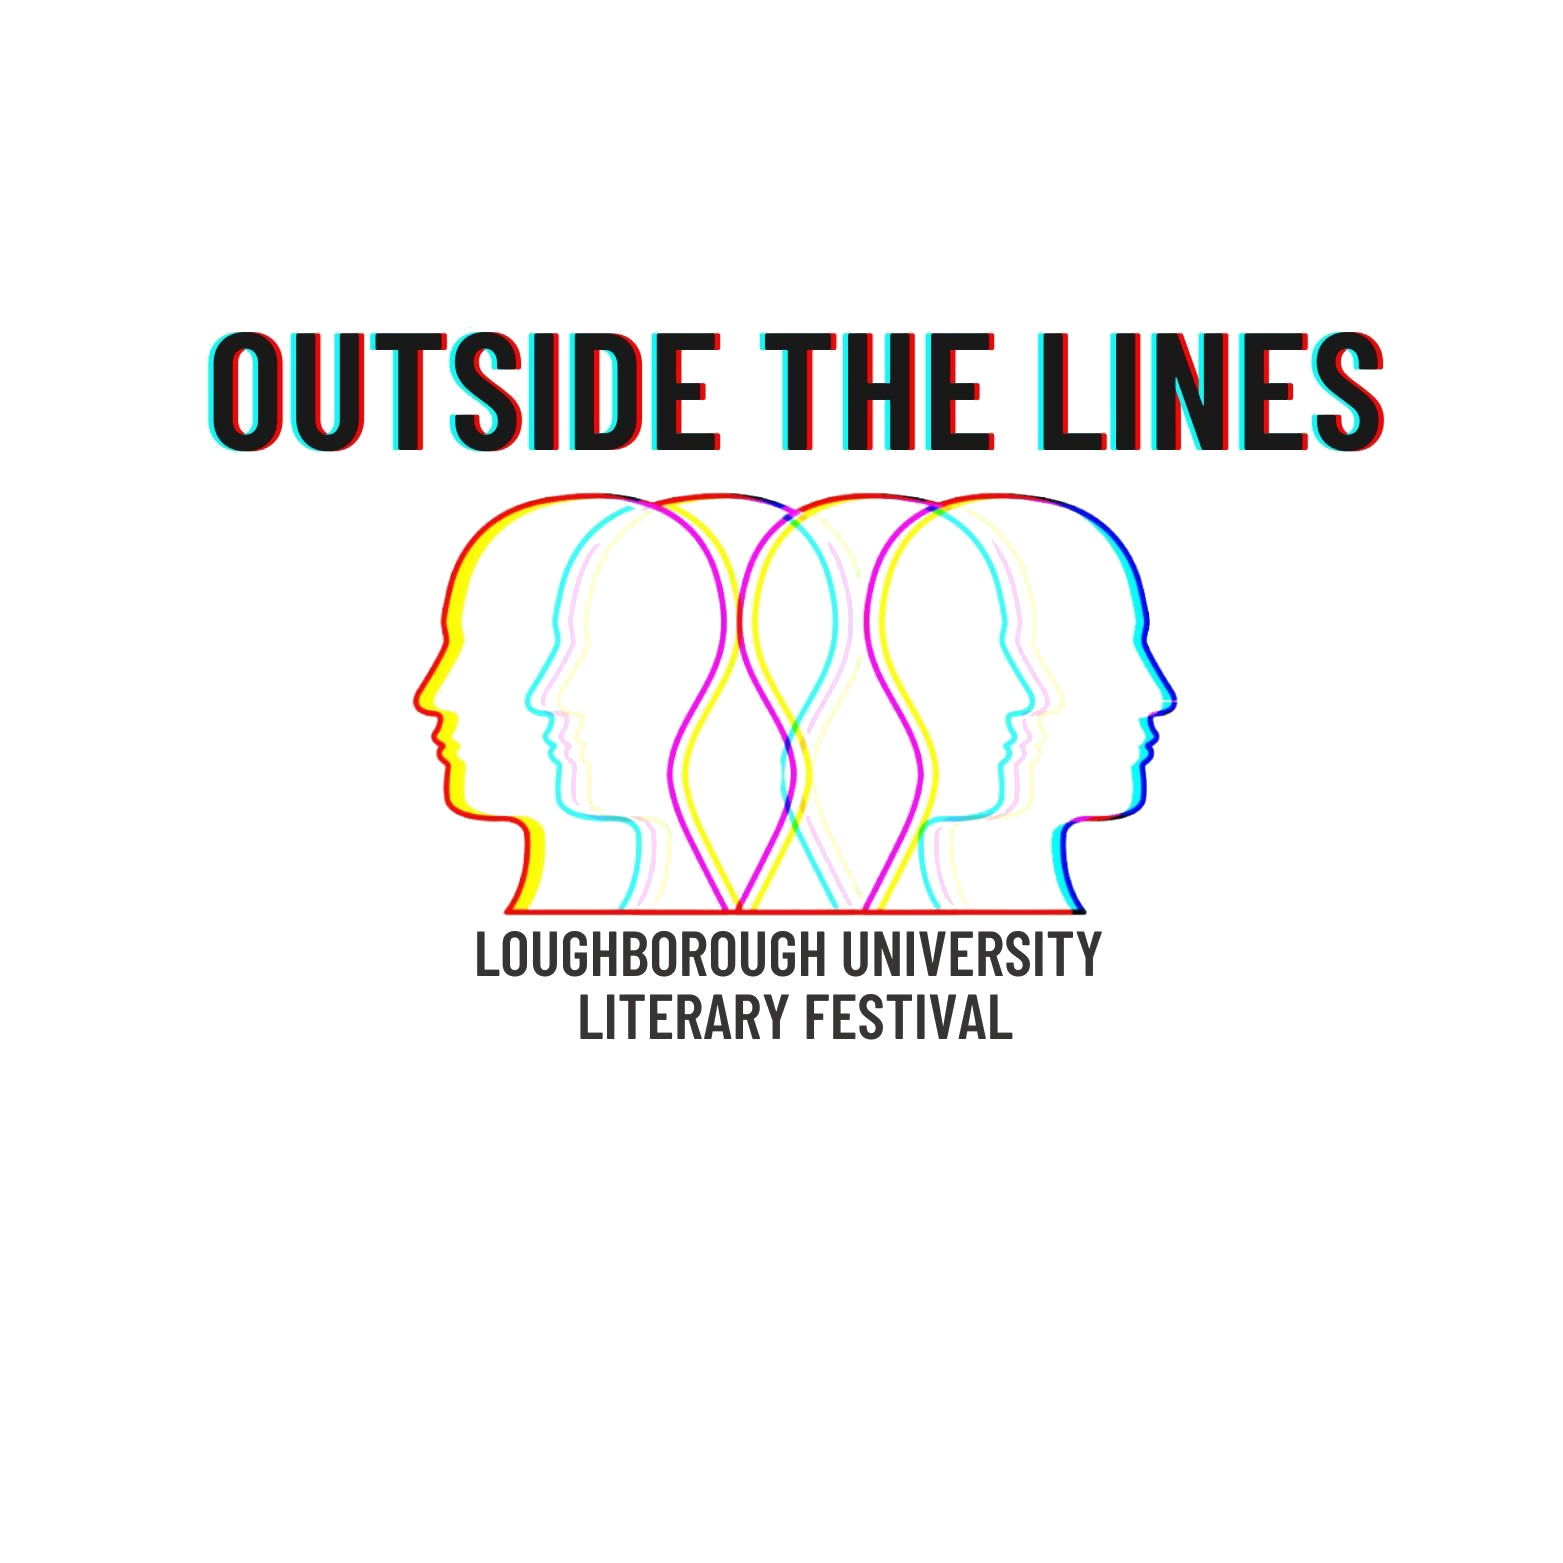 OUTSIDE THE LINES  